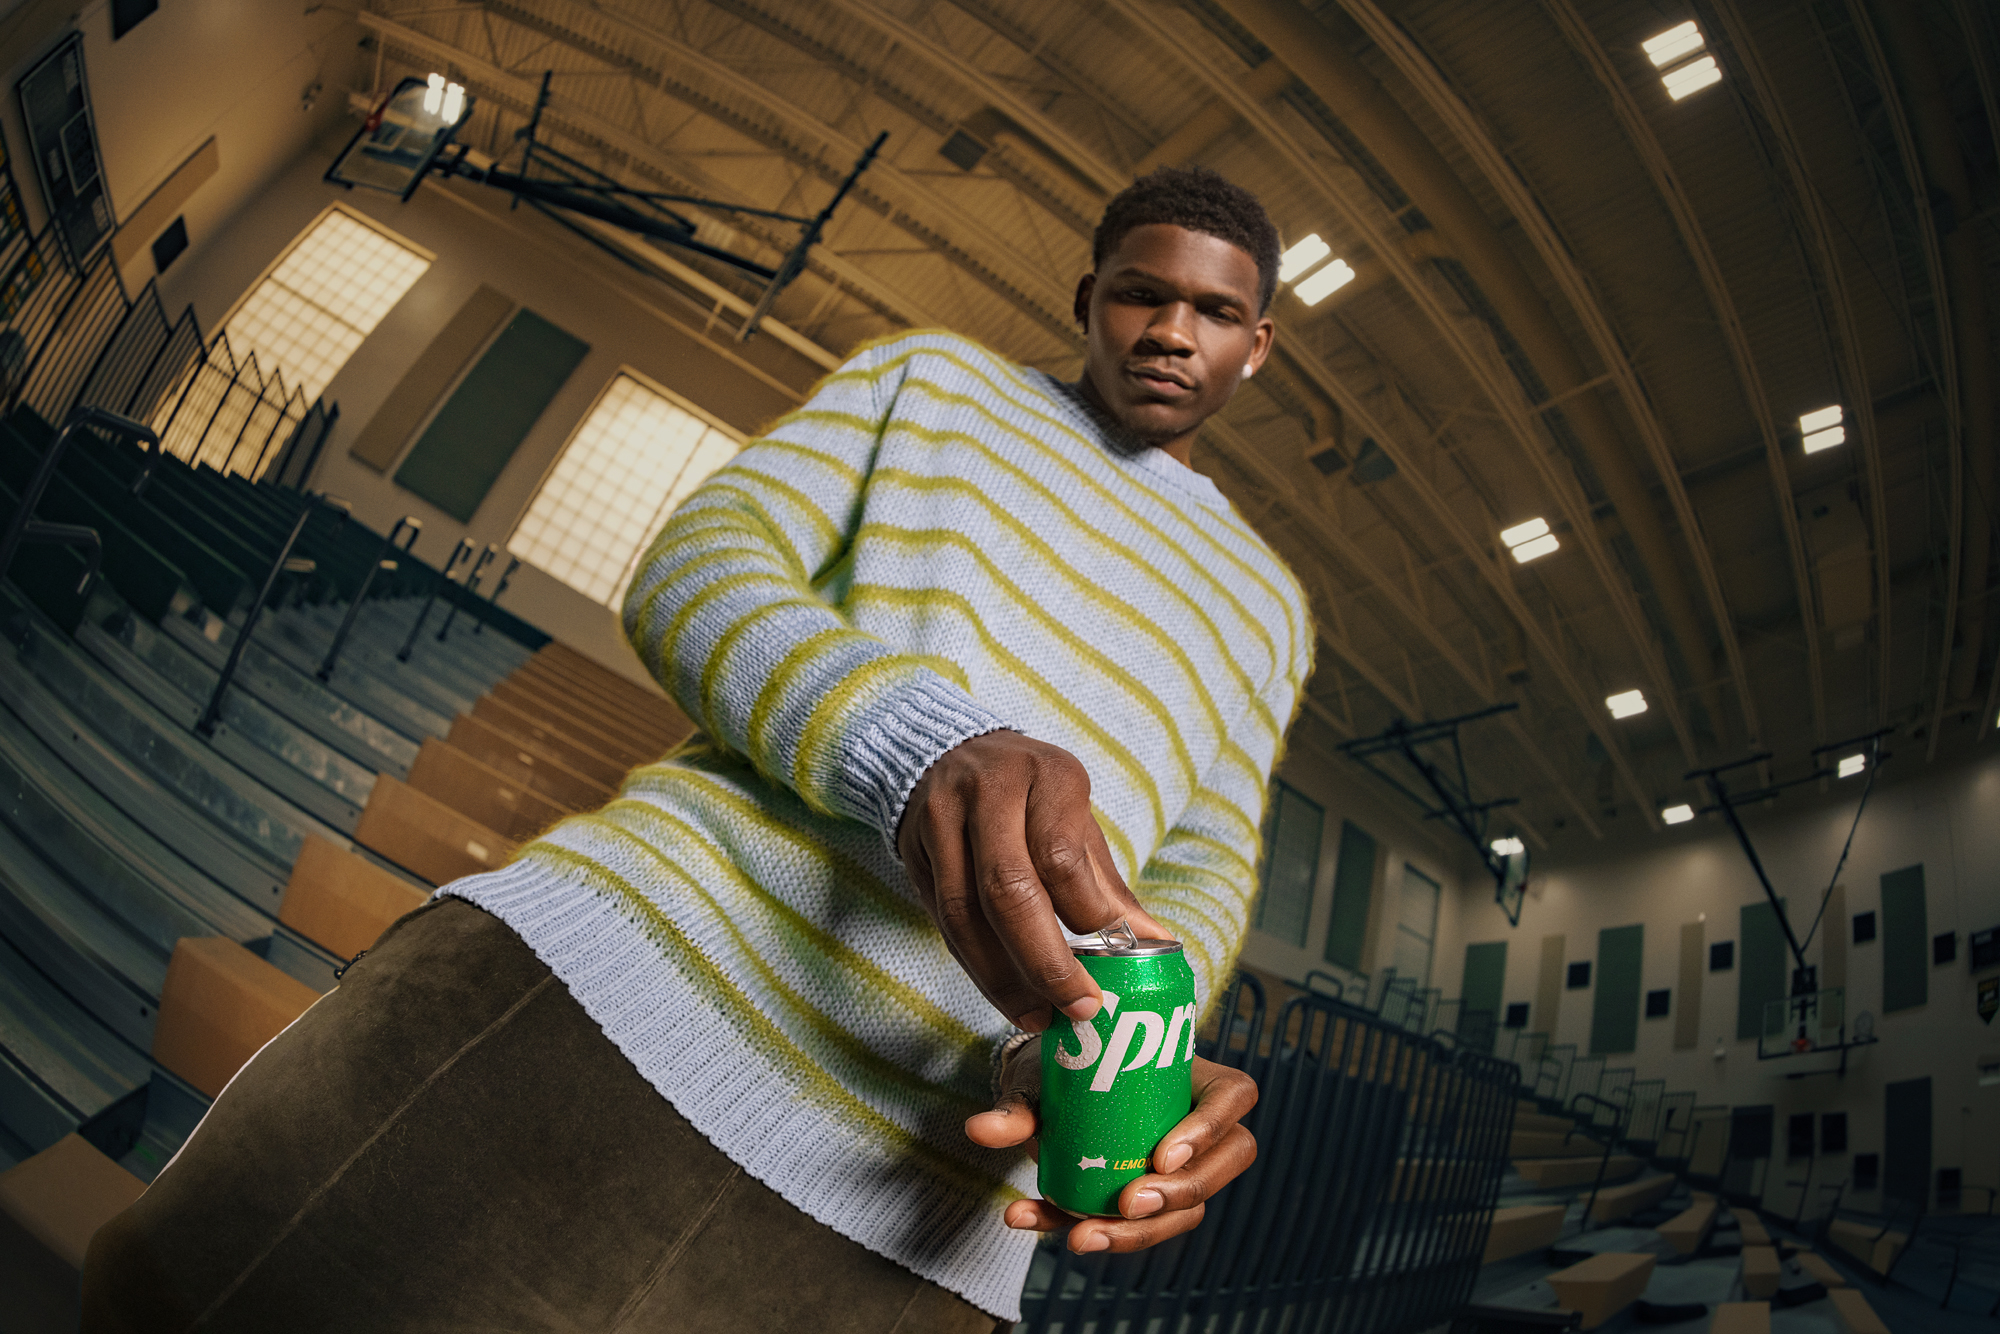 Person sitting in a gym holding a can of Sprite, wearing a striped sweater and leaning on their knee